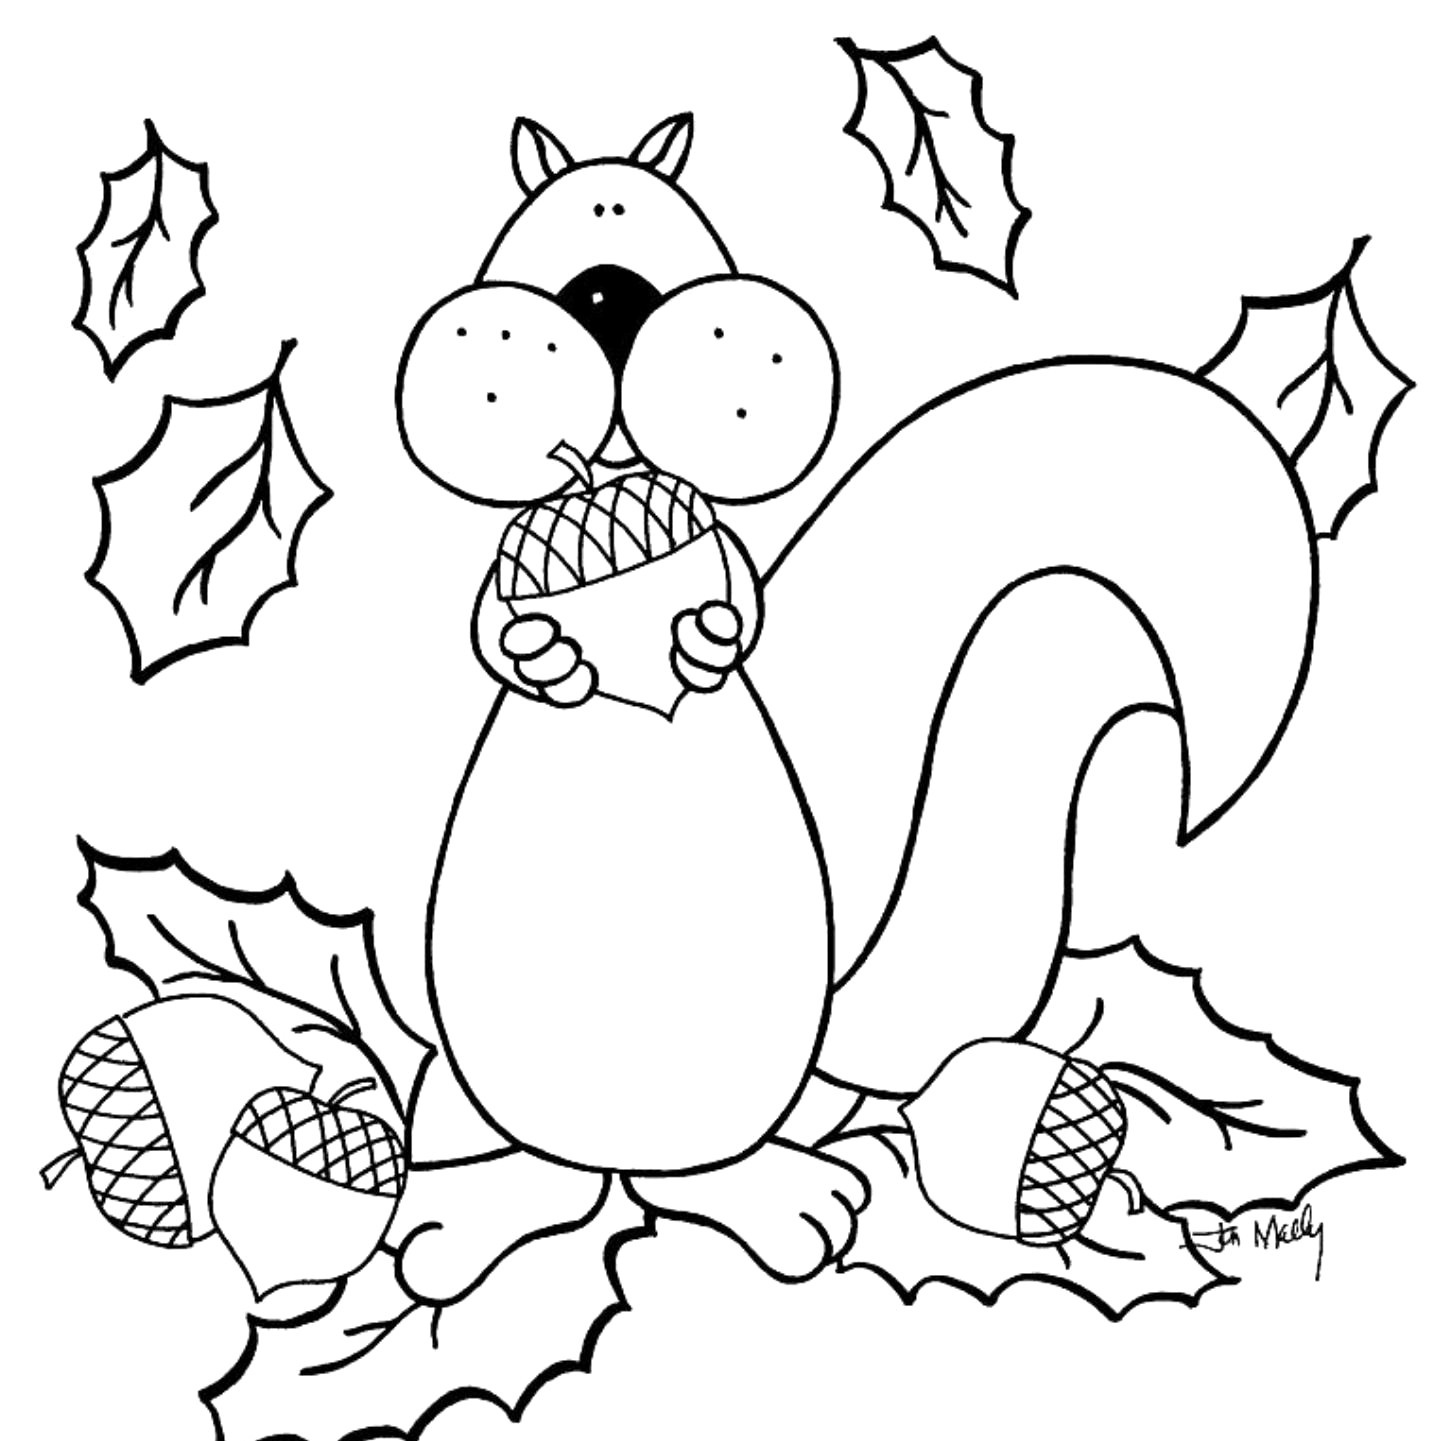 Autumn Animals Coloring Page Free Printable Coloring Pages Fall